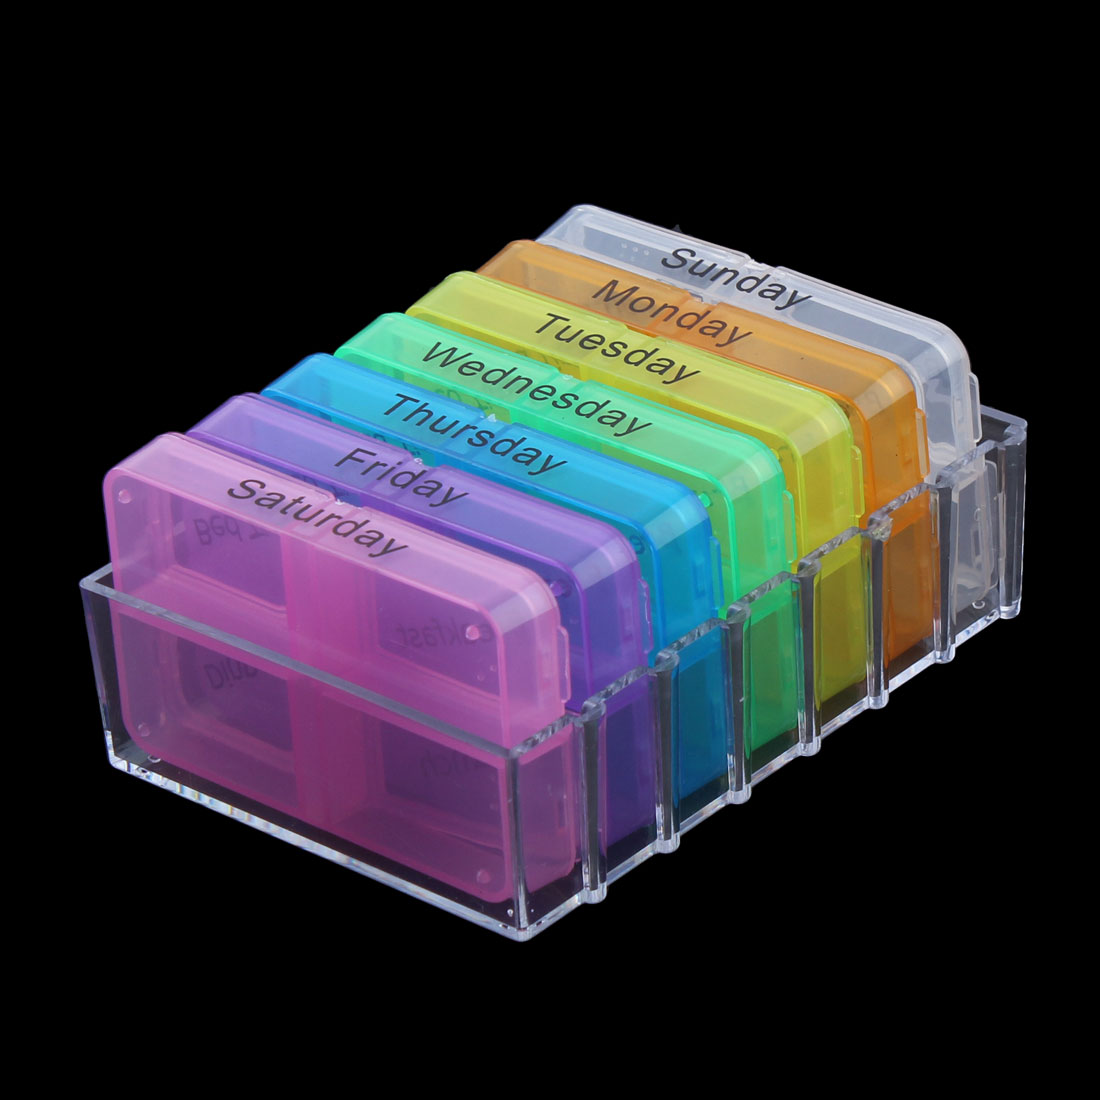 Unique Bargains Household Travel Detachable Medication Reminder Daily Am PM Weekly Pill Box Case